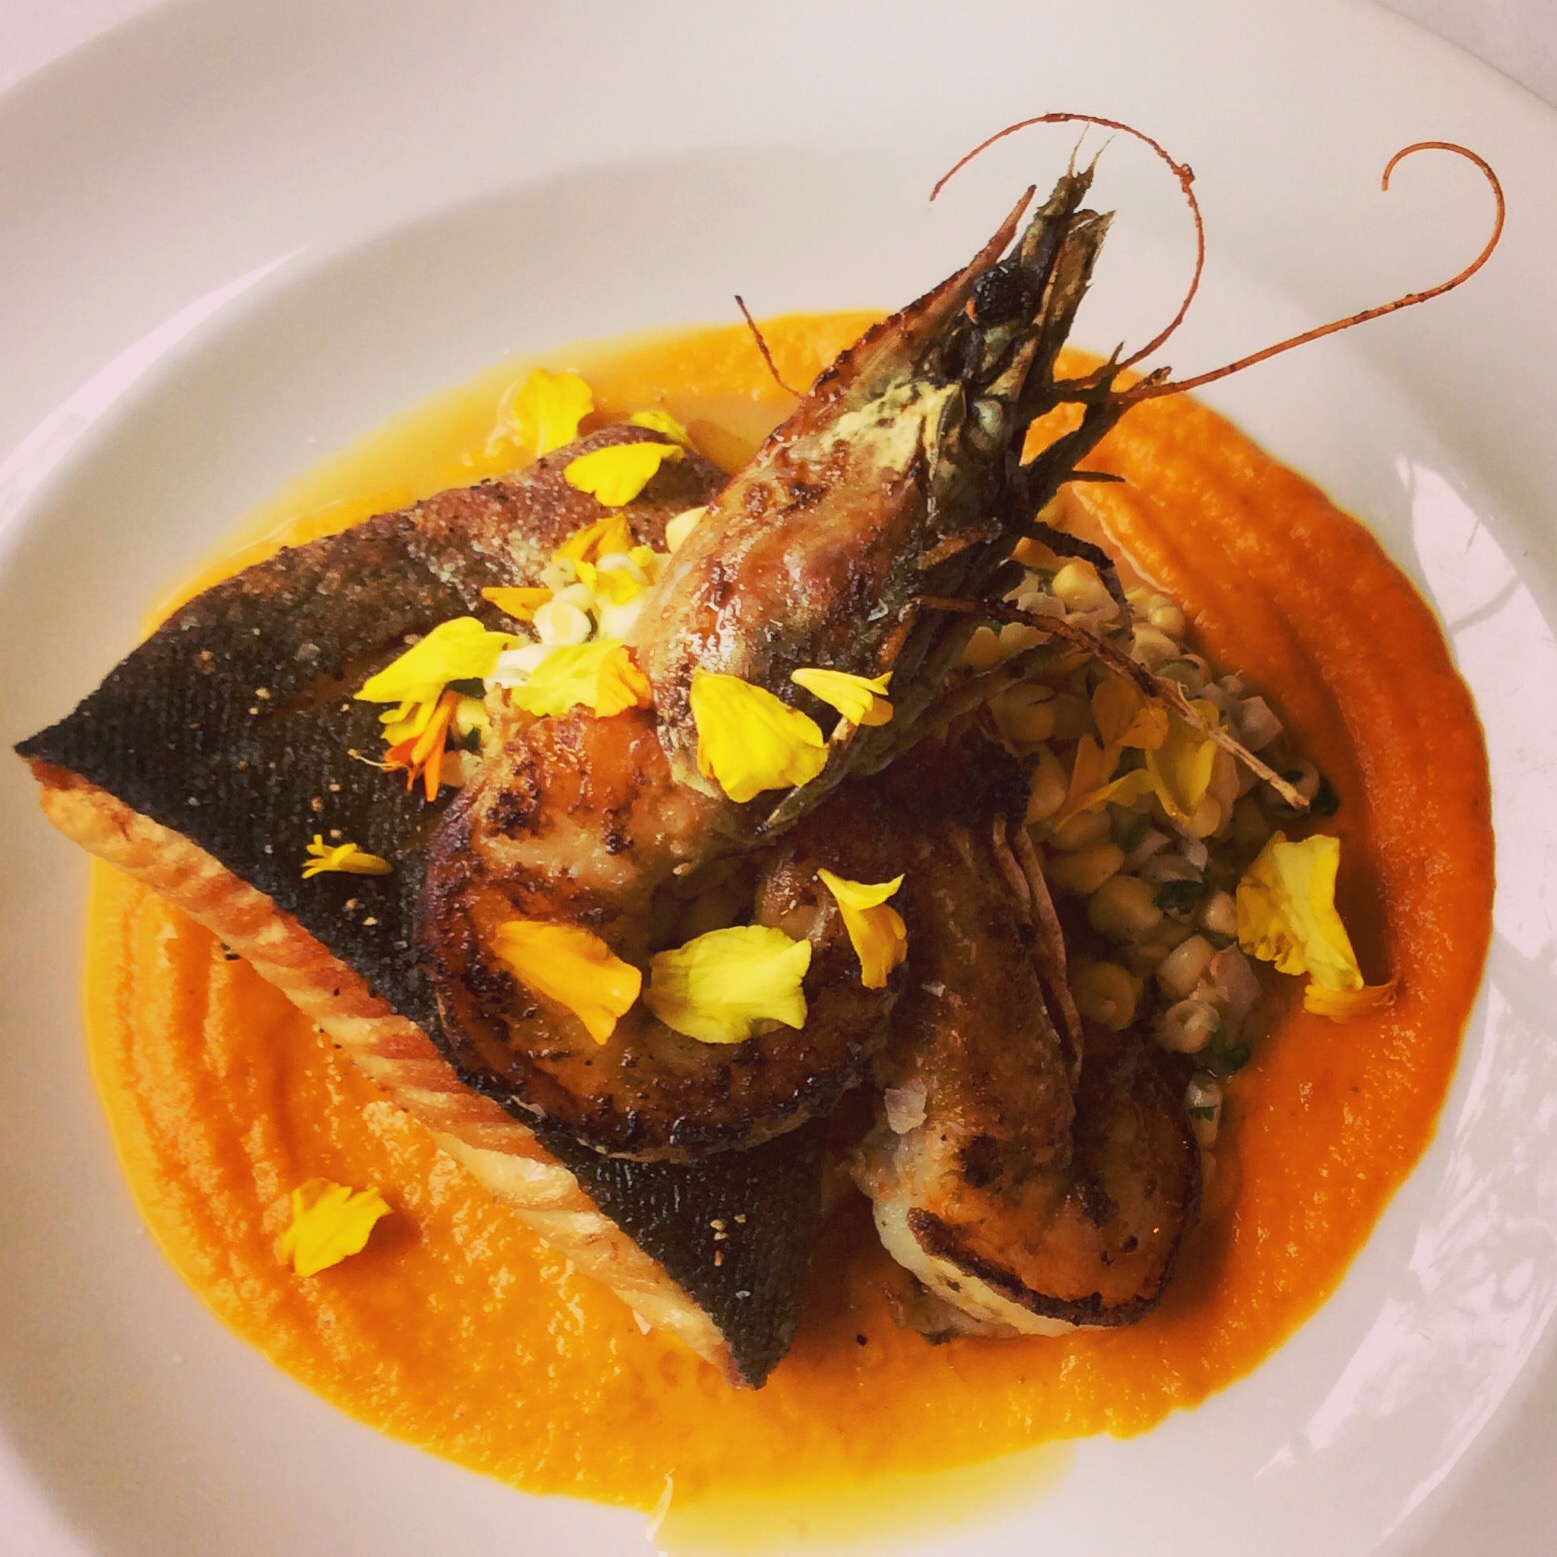 Pan-seared trout with prawns and squash puree.